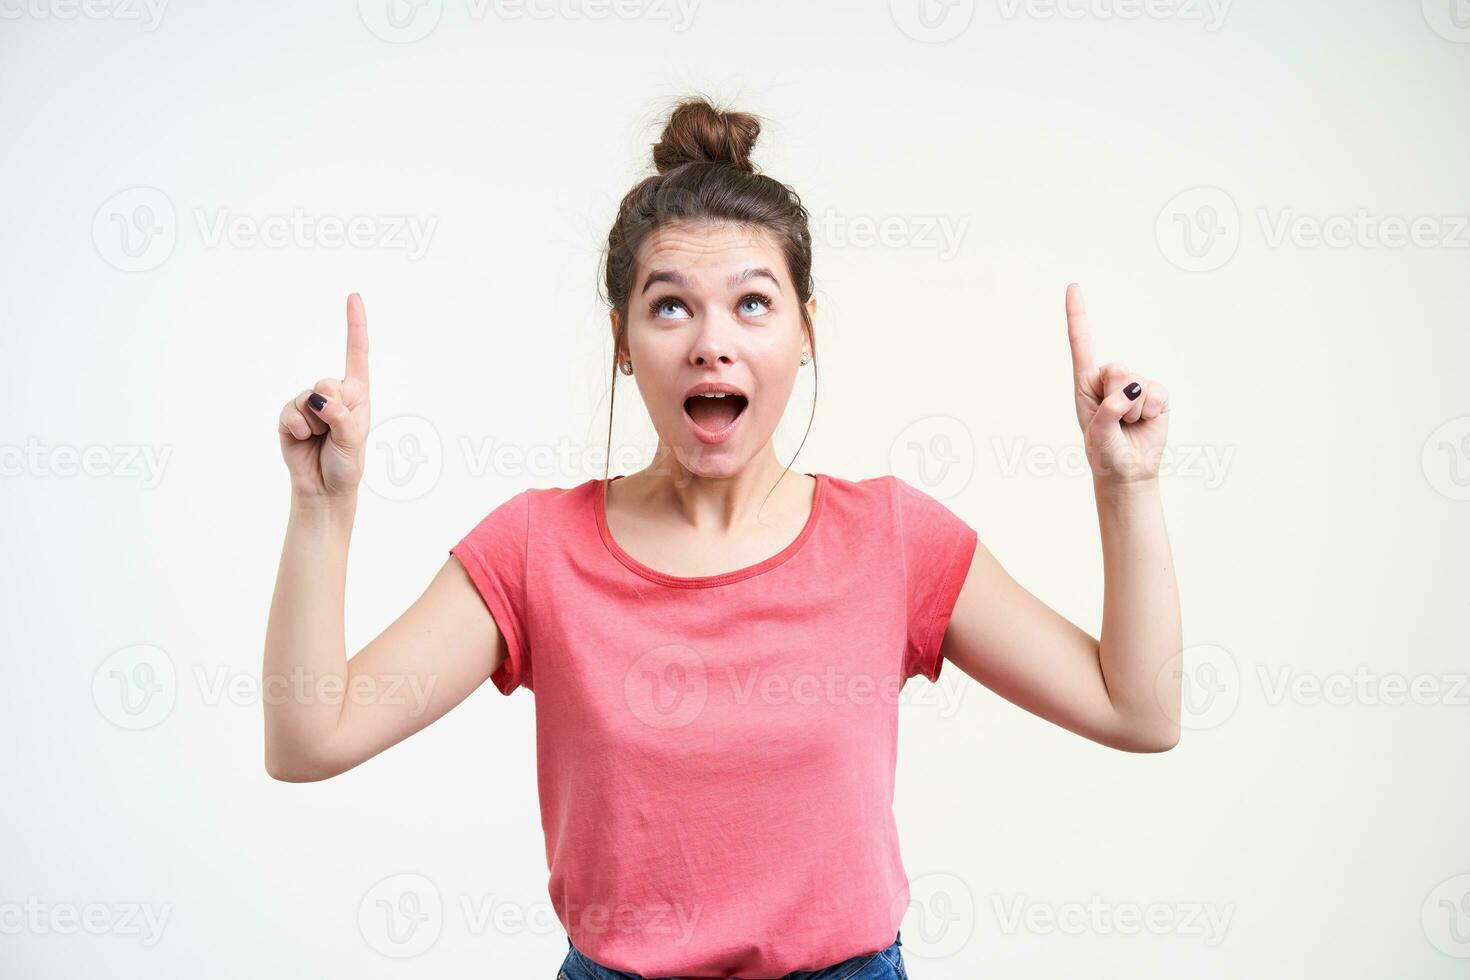 Agitated young lovely brown haired female keeping her mouth opened while pointing excitedly upwards with index fingers, isolated over white background photo